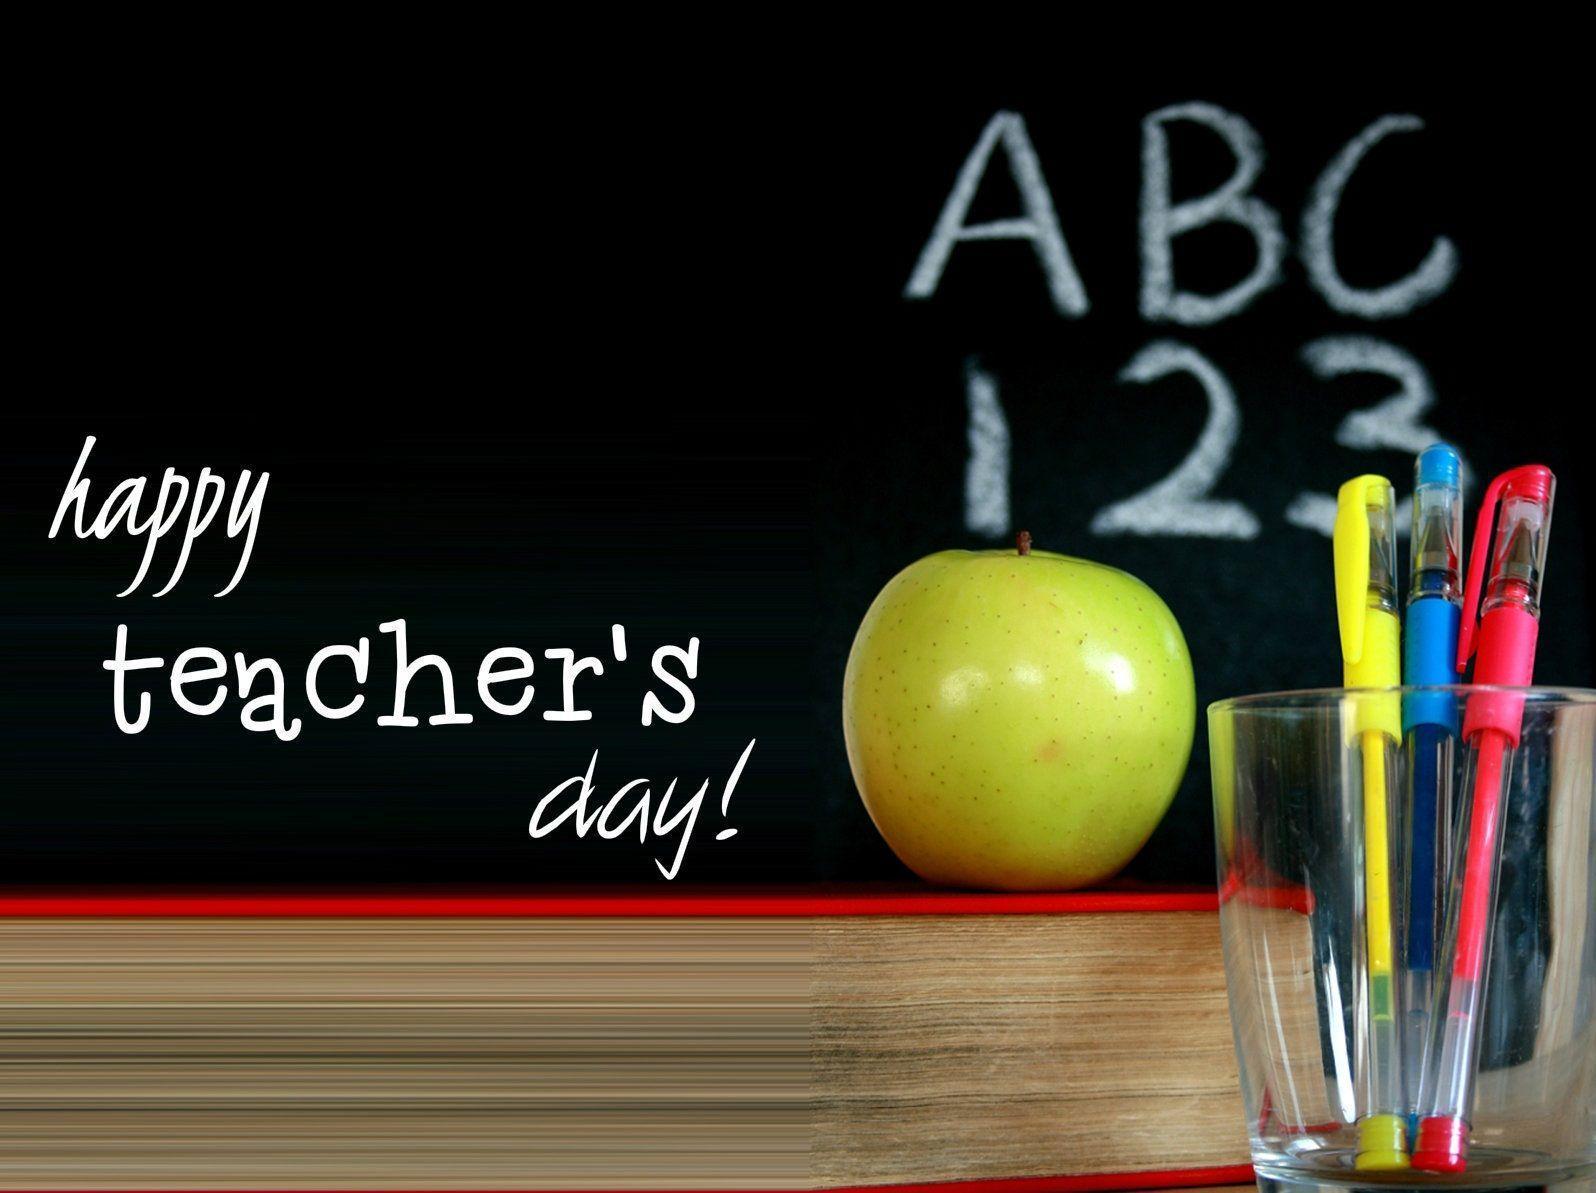 Happy Teachers Day Wallpaper, Image, Picture, Greetings for the Teachers